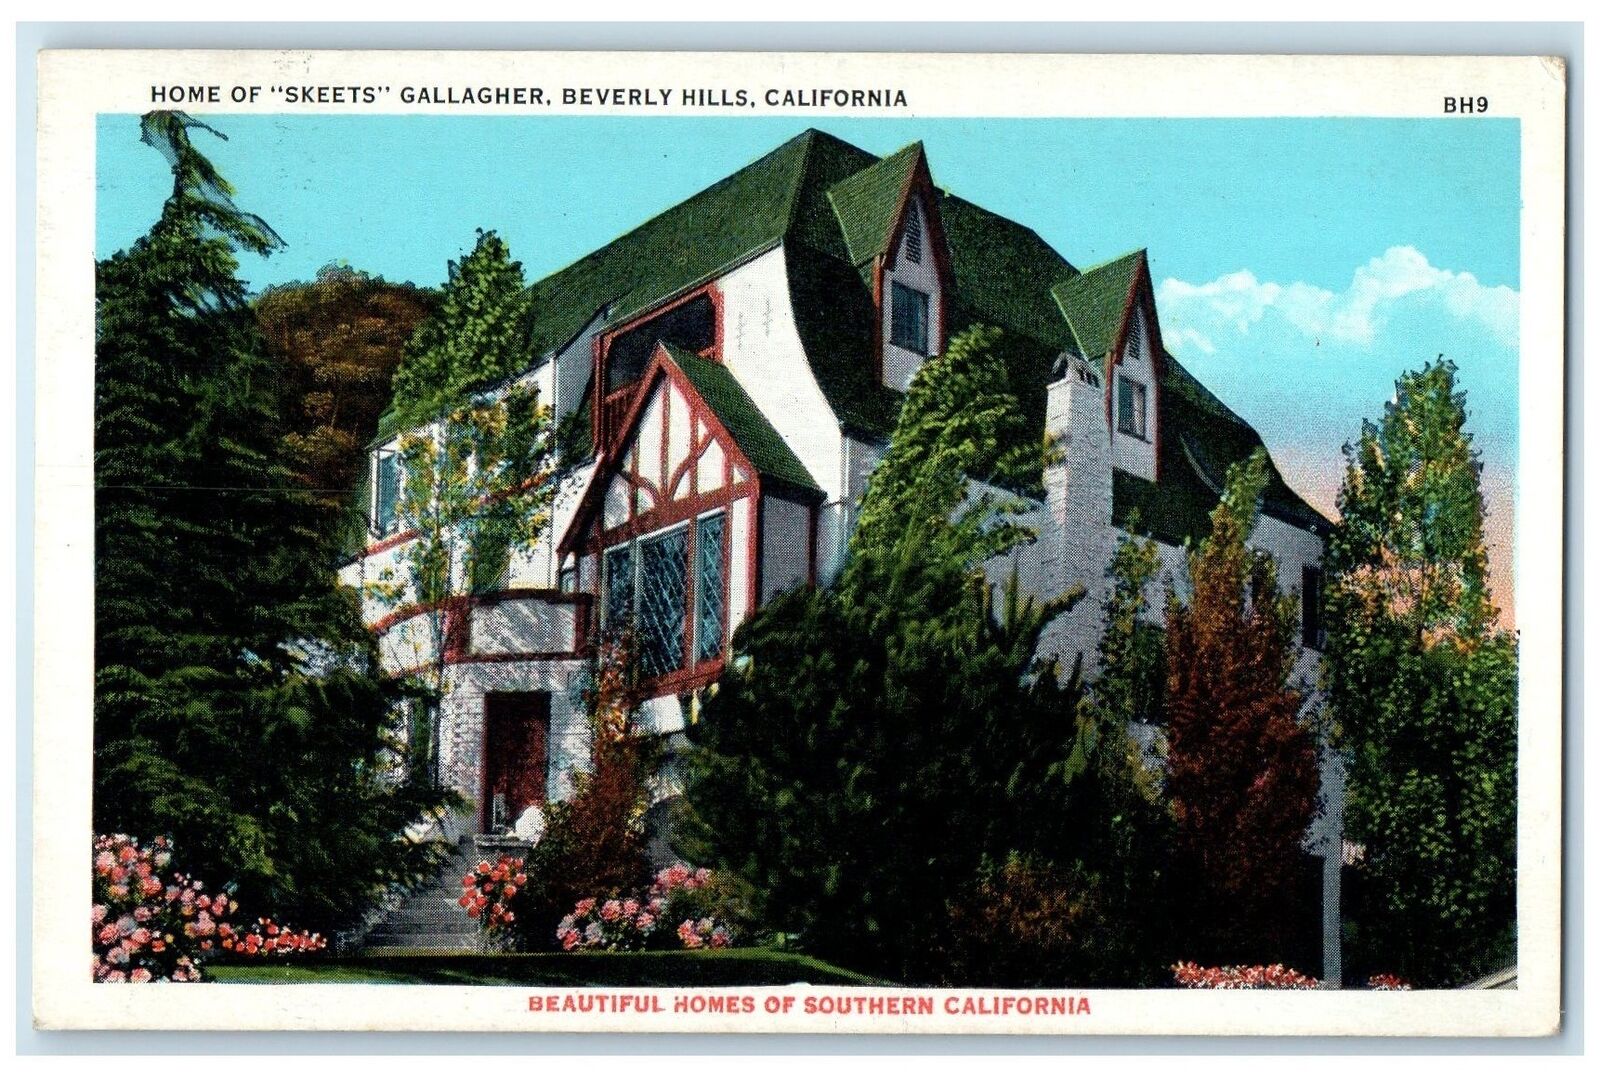 c1940s Home Of Skeets Gallagher Beverly Hills Los Angeles California CA Postcard